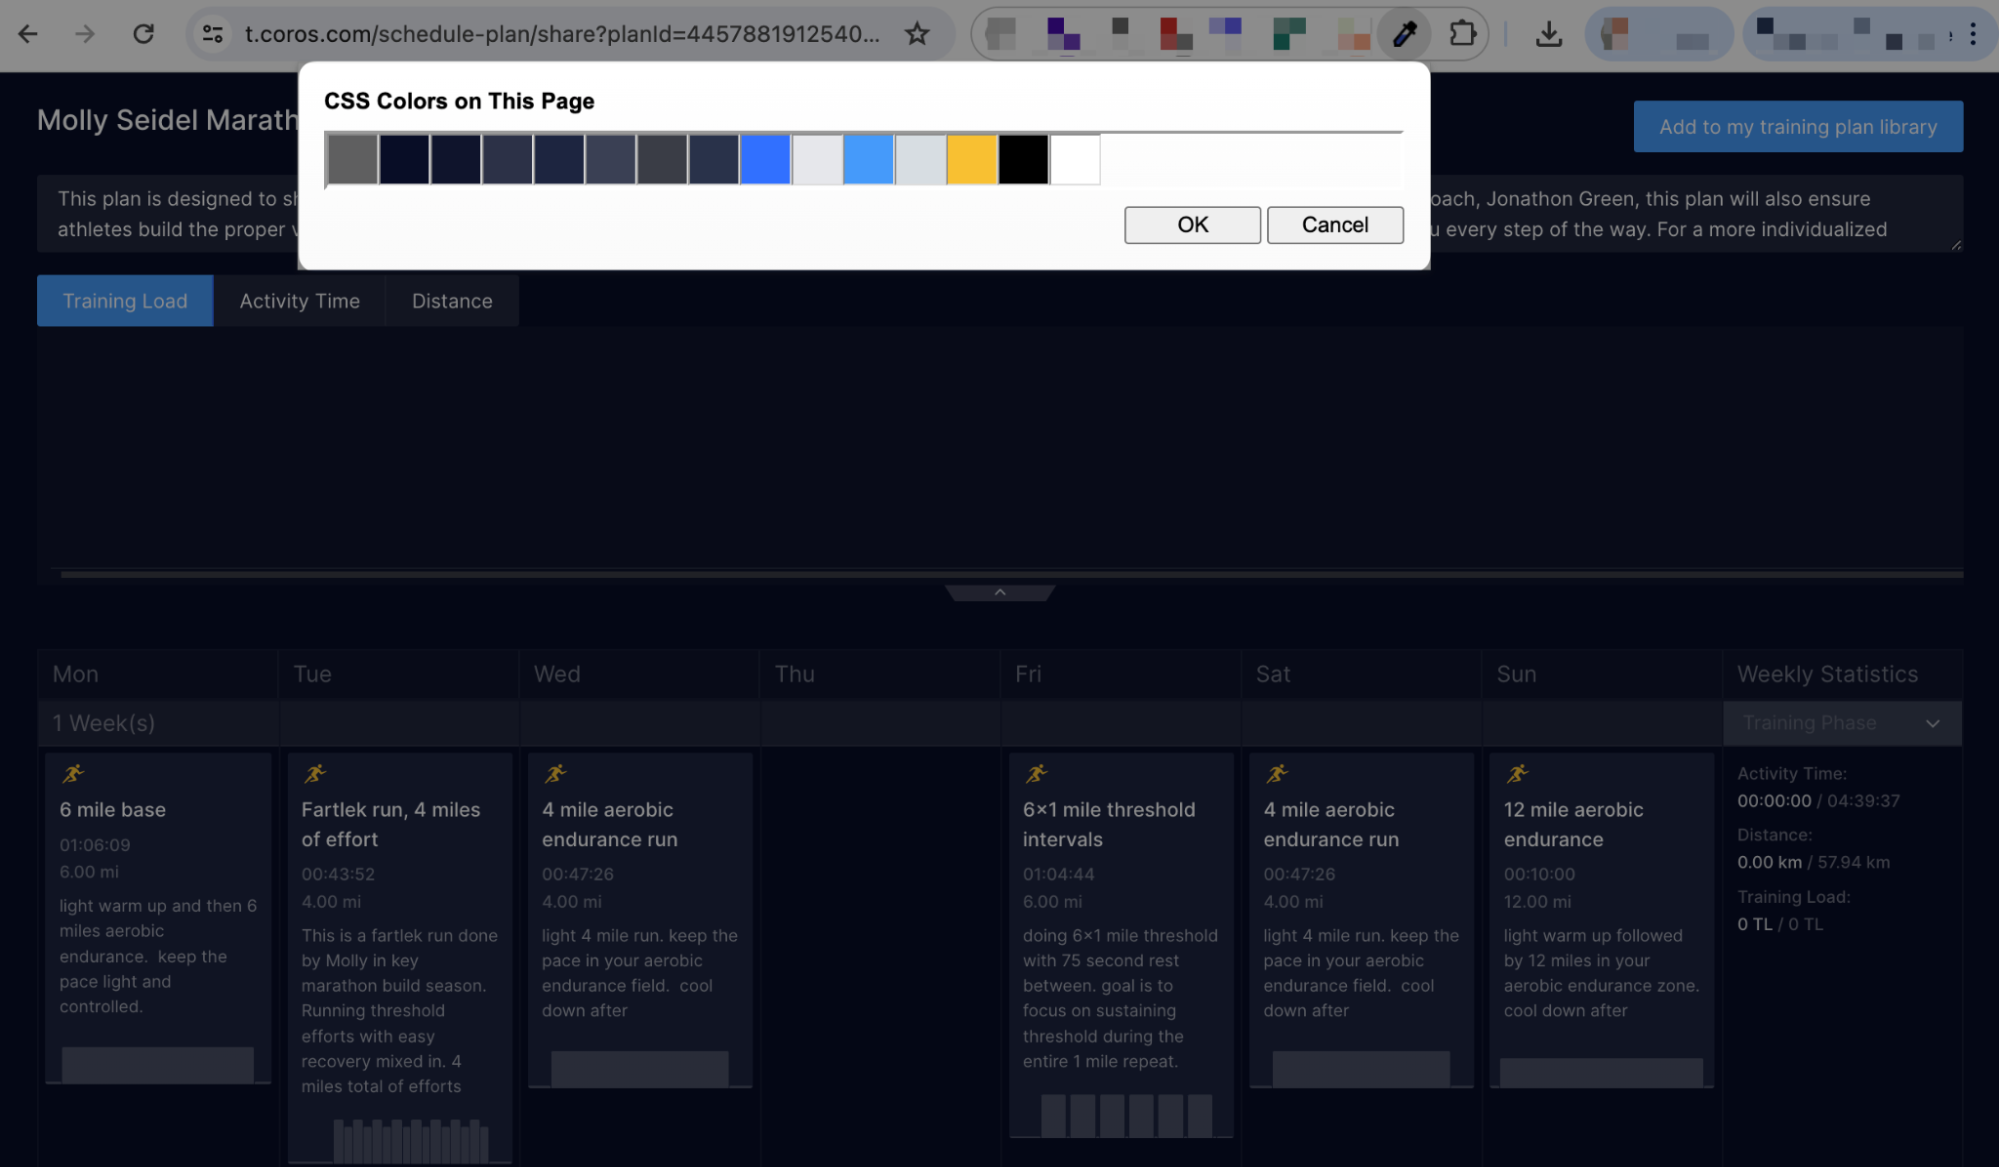 Pop-up dialog with CSS color palette for current page over a weekly running schedule.